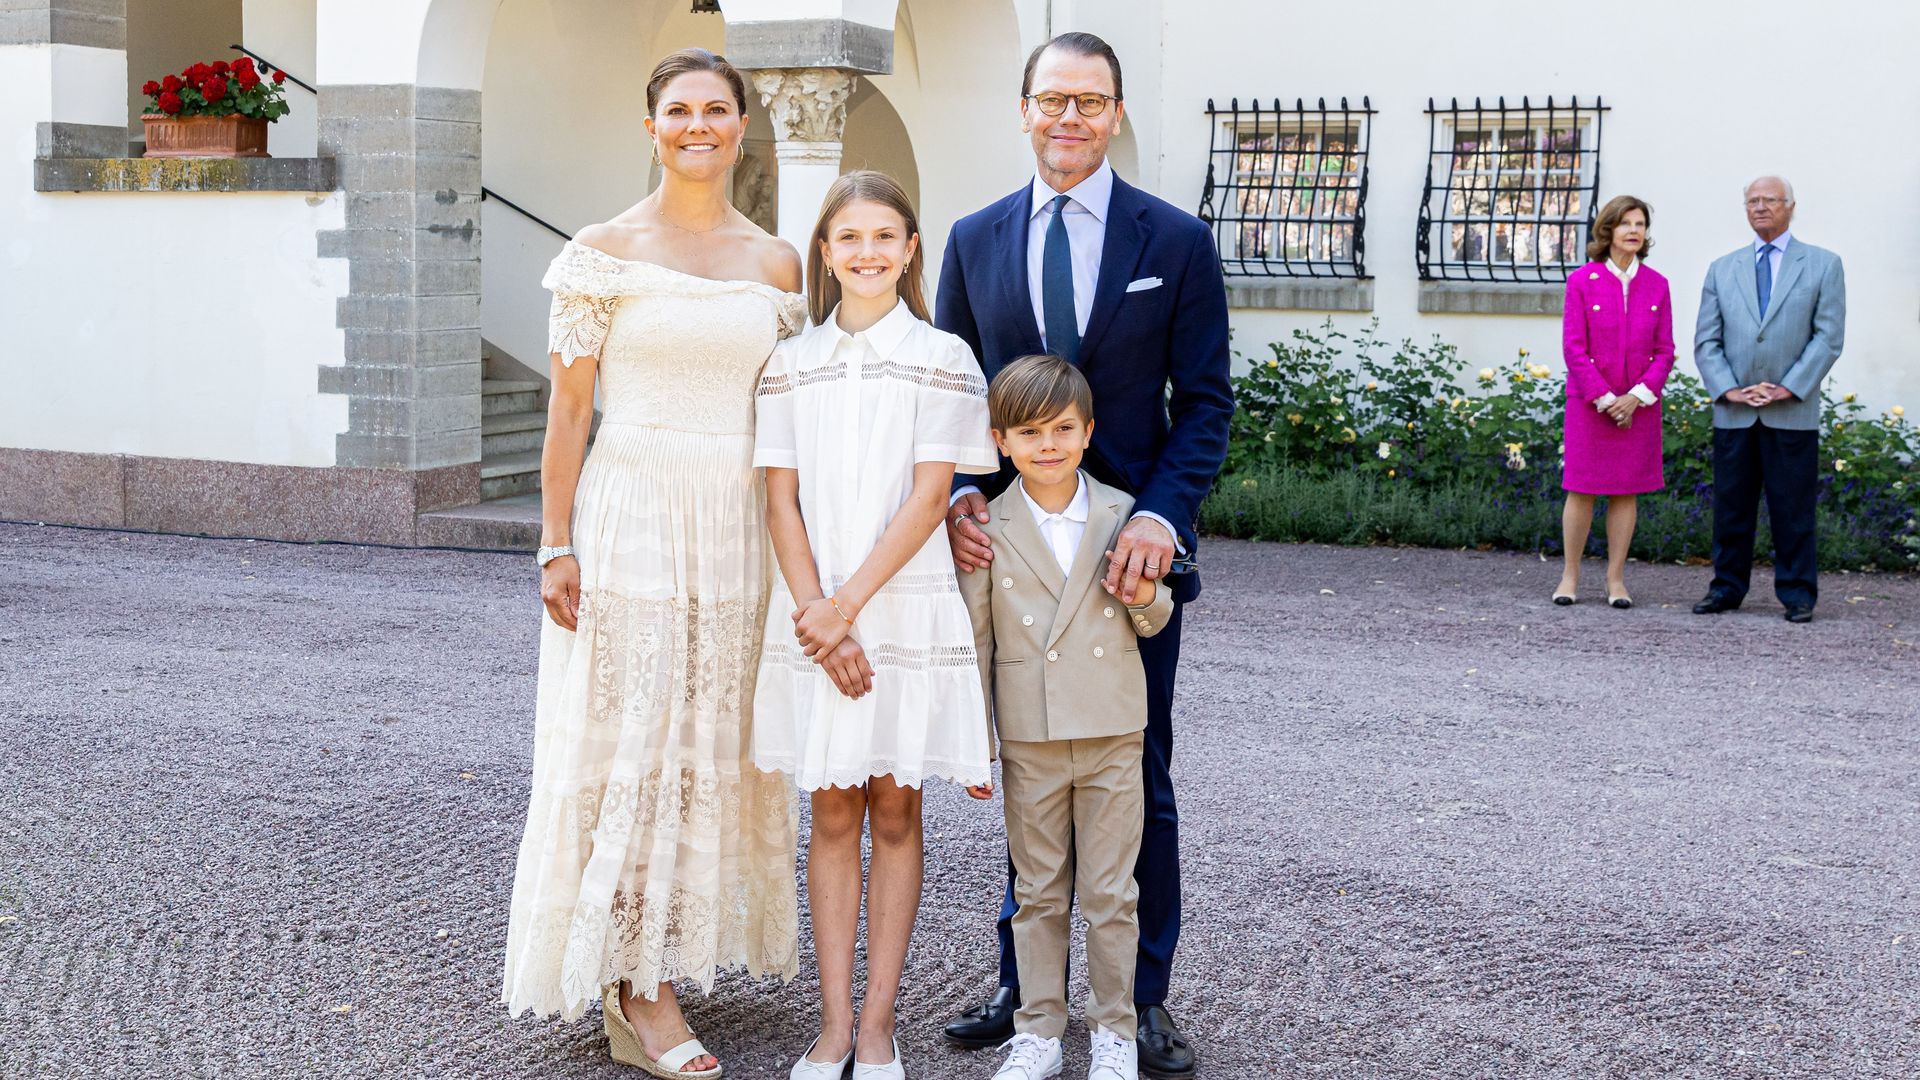 Crown Princess Victoria of Sweden, Prince Daniel of Sweden, Princess Estelle of Sweden and Prince Oscar of Sweden attend the birthday celebration of the Crown Princess at Solliden Castl